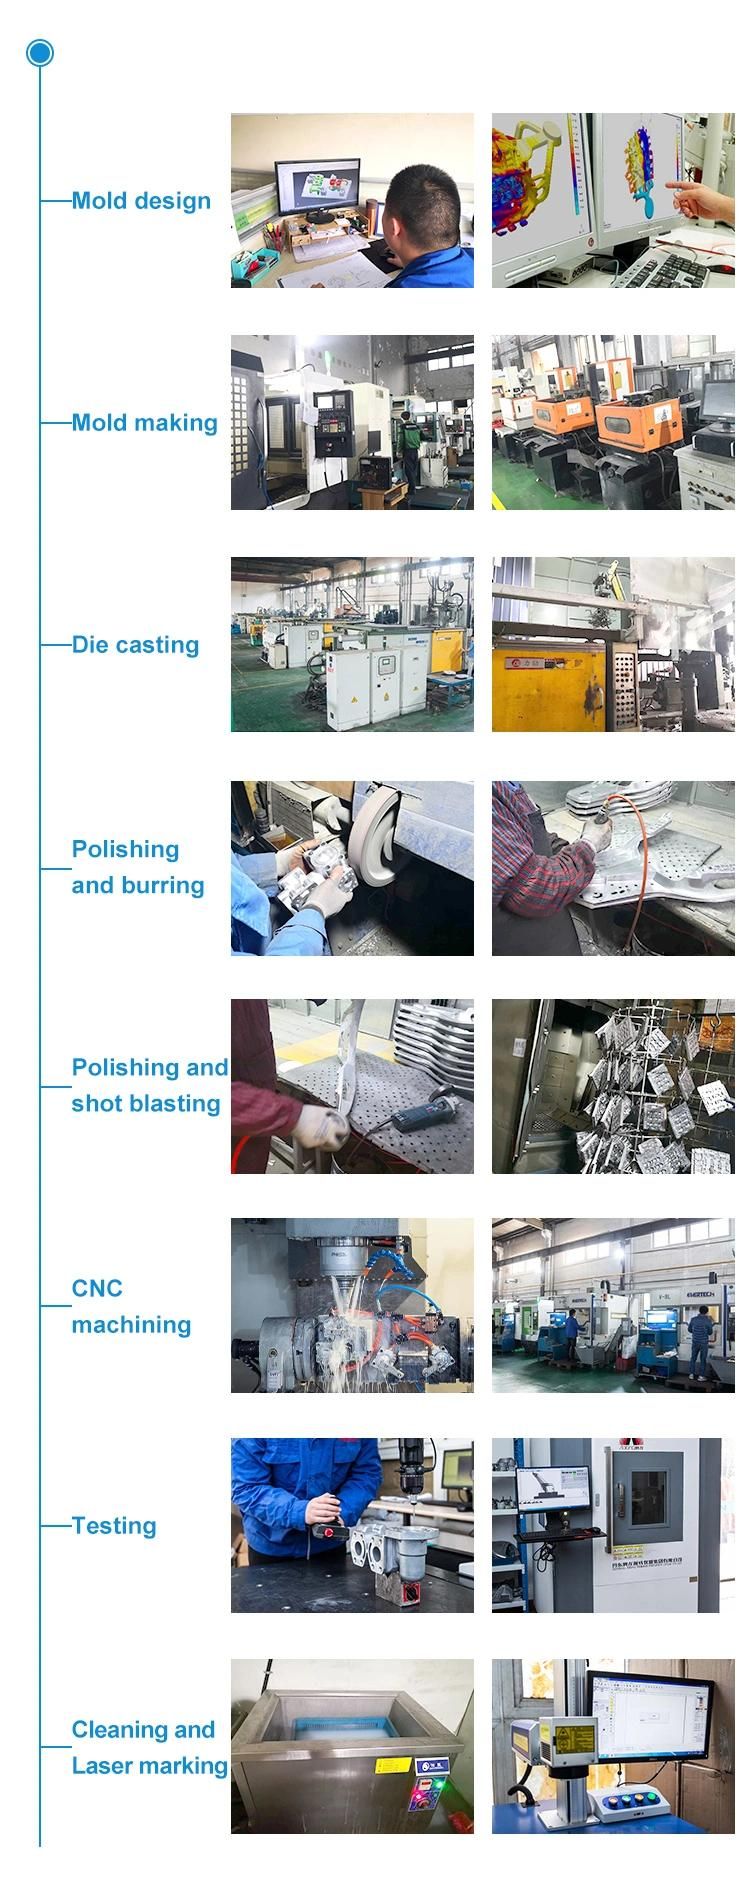 Monthly Deals Customized Die Casting Mould of Car Steering Wheel/Rich Experience/High Quality Factory